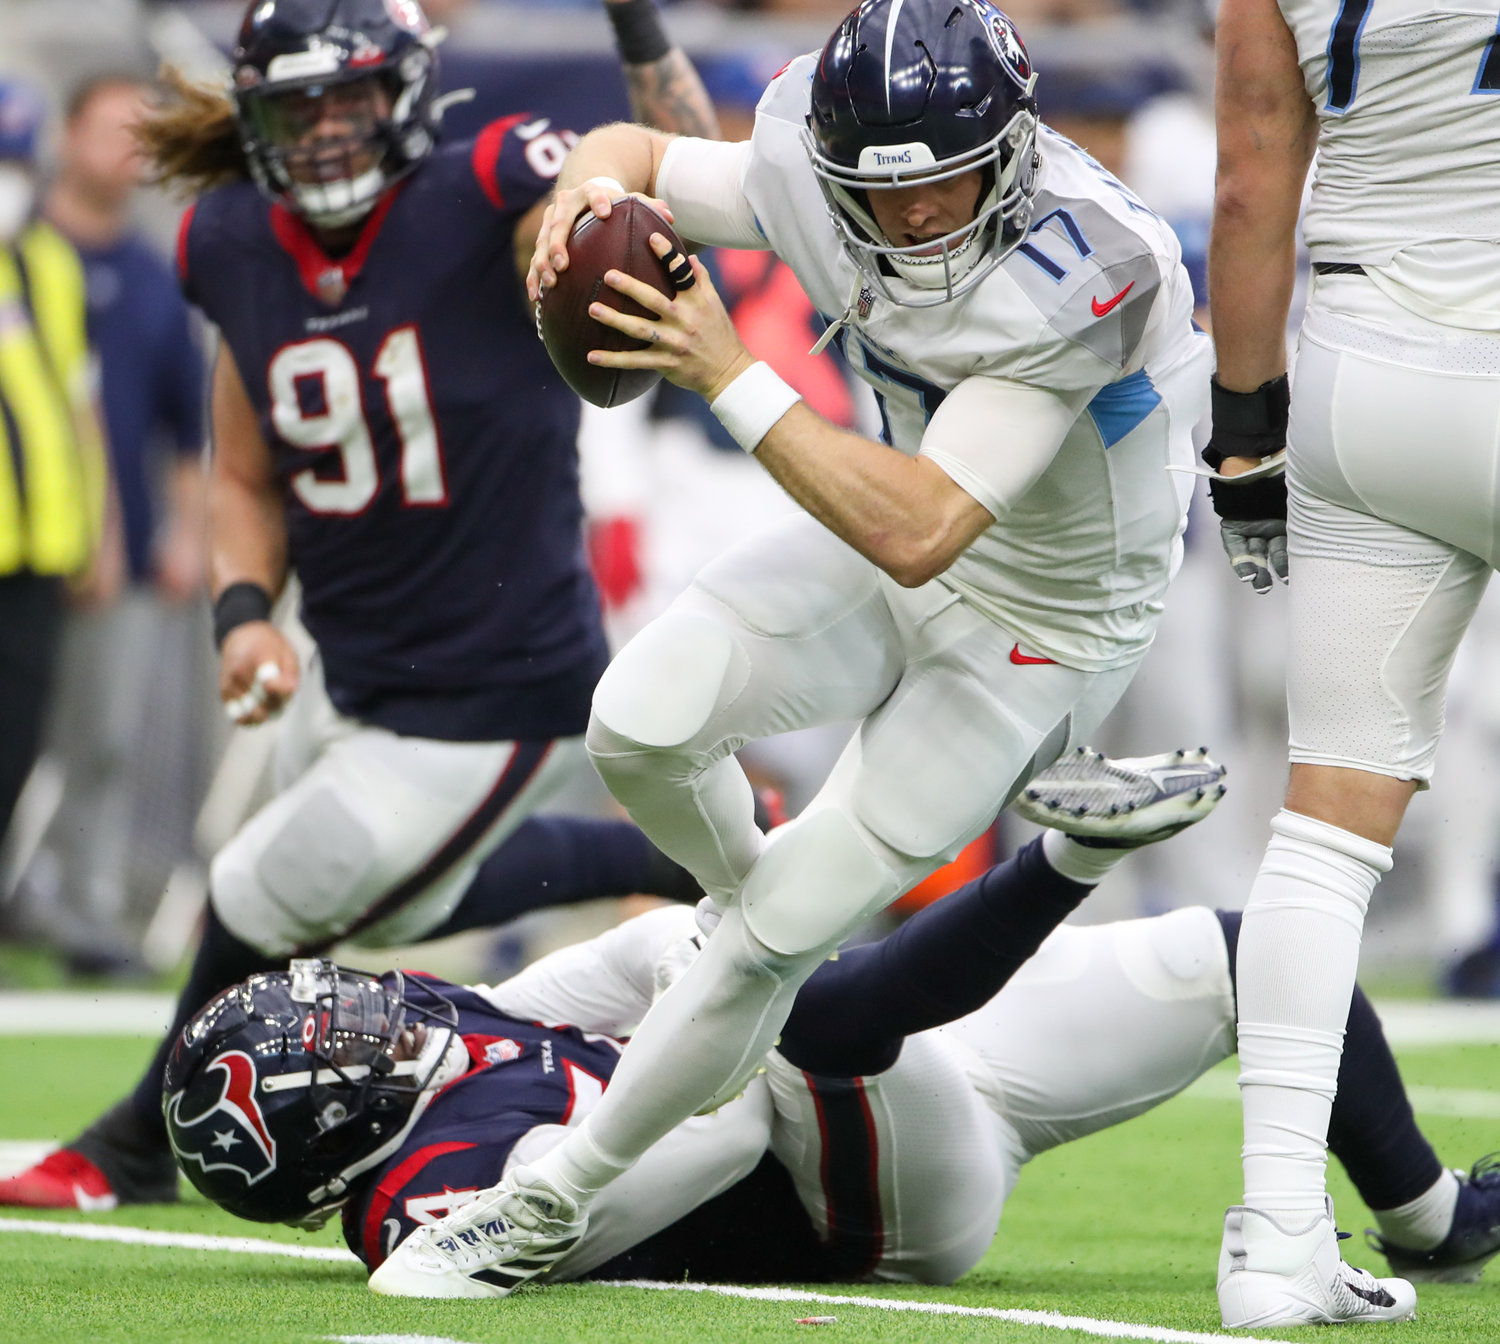 Tennessee Titans quarterback Ryan Tannehill (17) escapes a would-be sack by Houston Texans defensive end Jacob Martin (54) during an NFL game on Jan. 9, 2022 in Houston, Texas. The Titans won, 28-25.